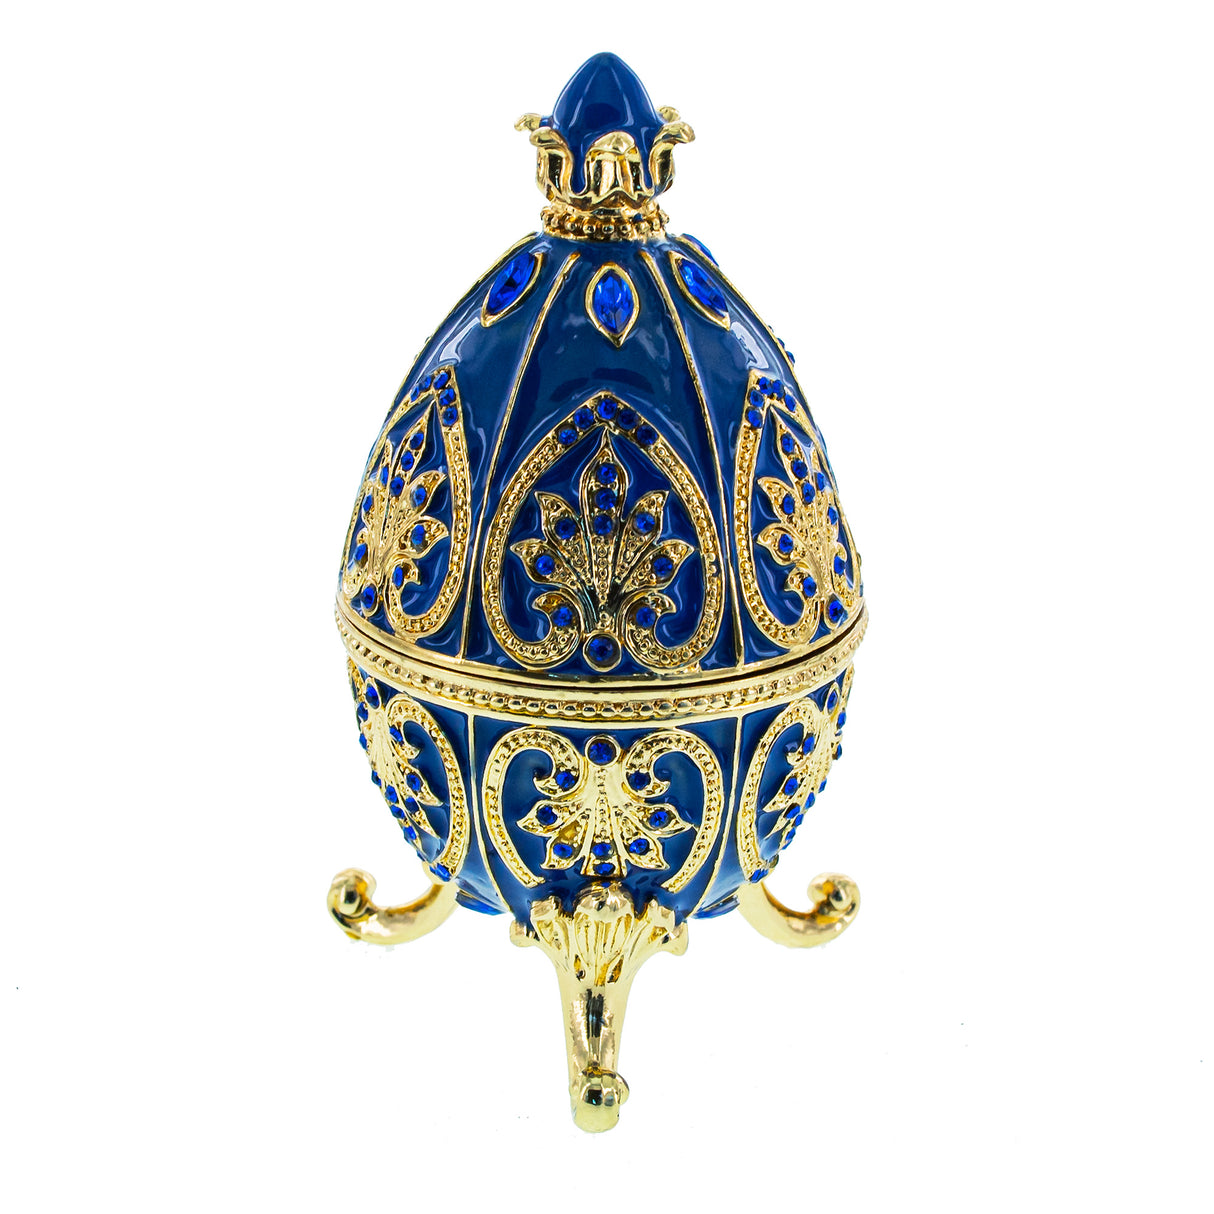 Blue Jewel Royal Inspired Easter Egg 4.5 Inches in Blue color, Oval shape